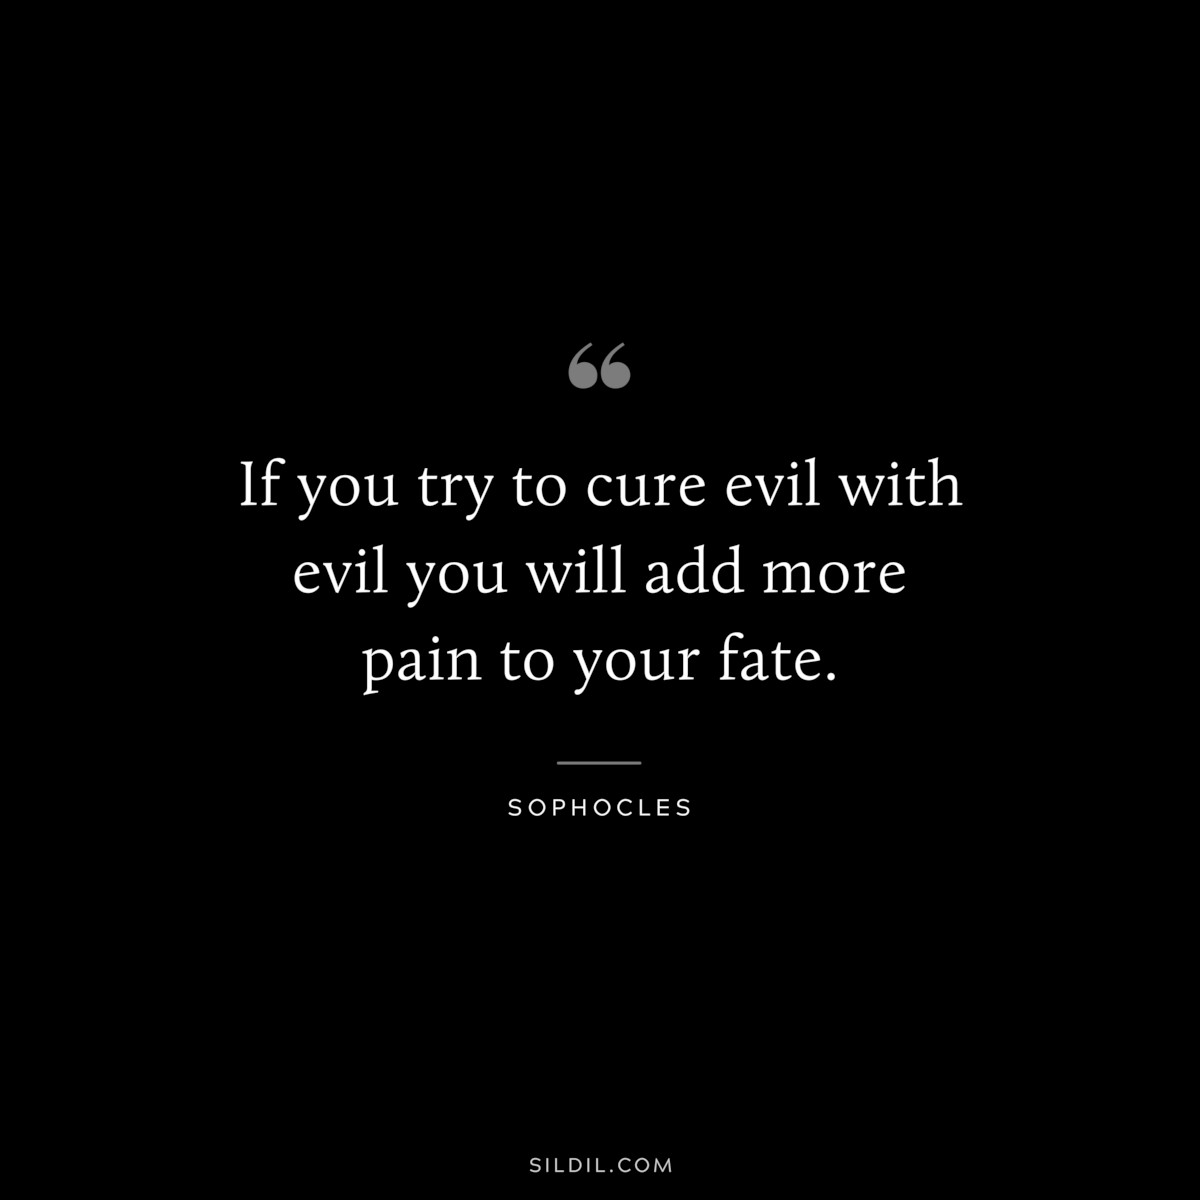 If you try to cure evil with evil you will add more pain to your fate. ― Sophocles